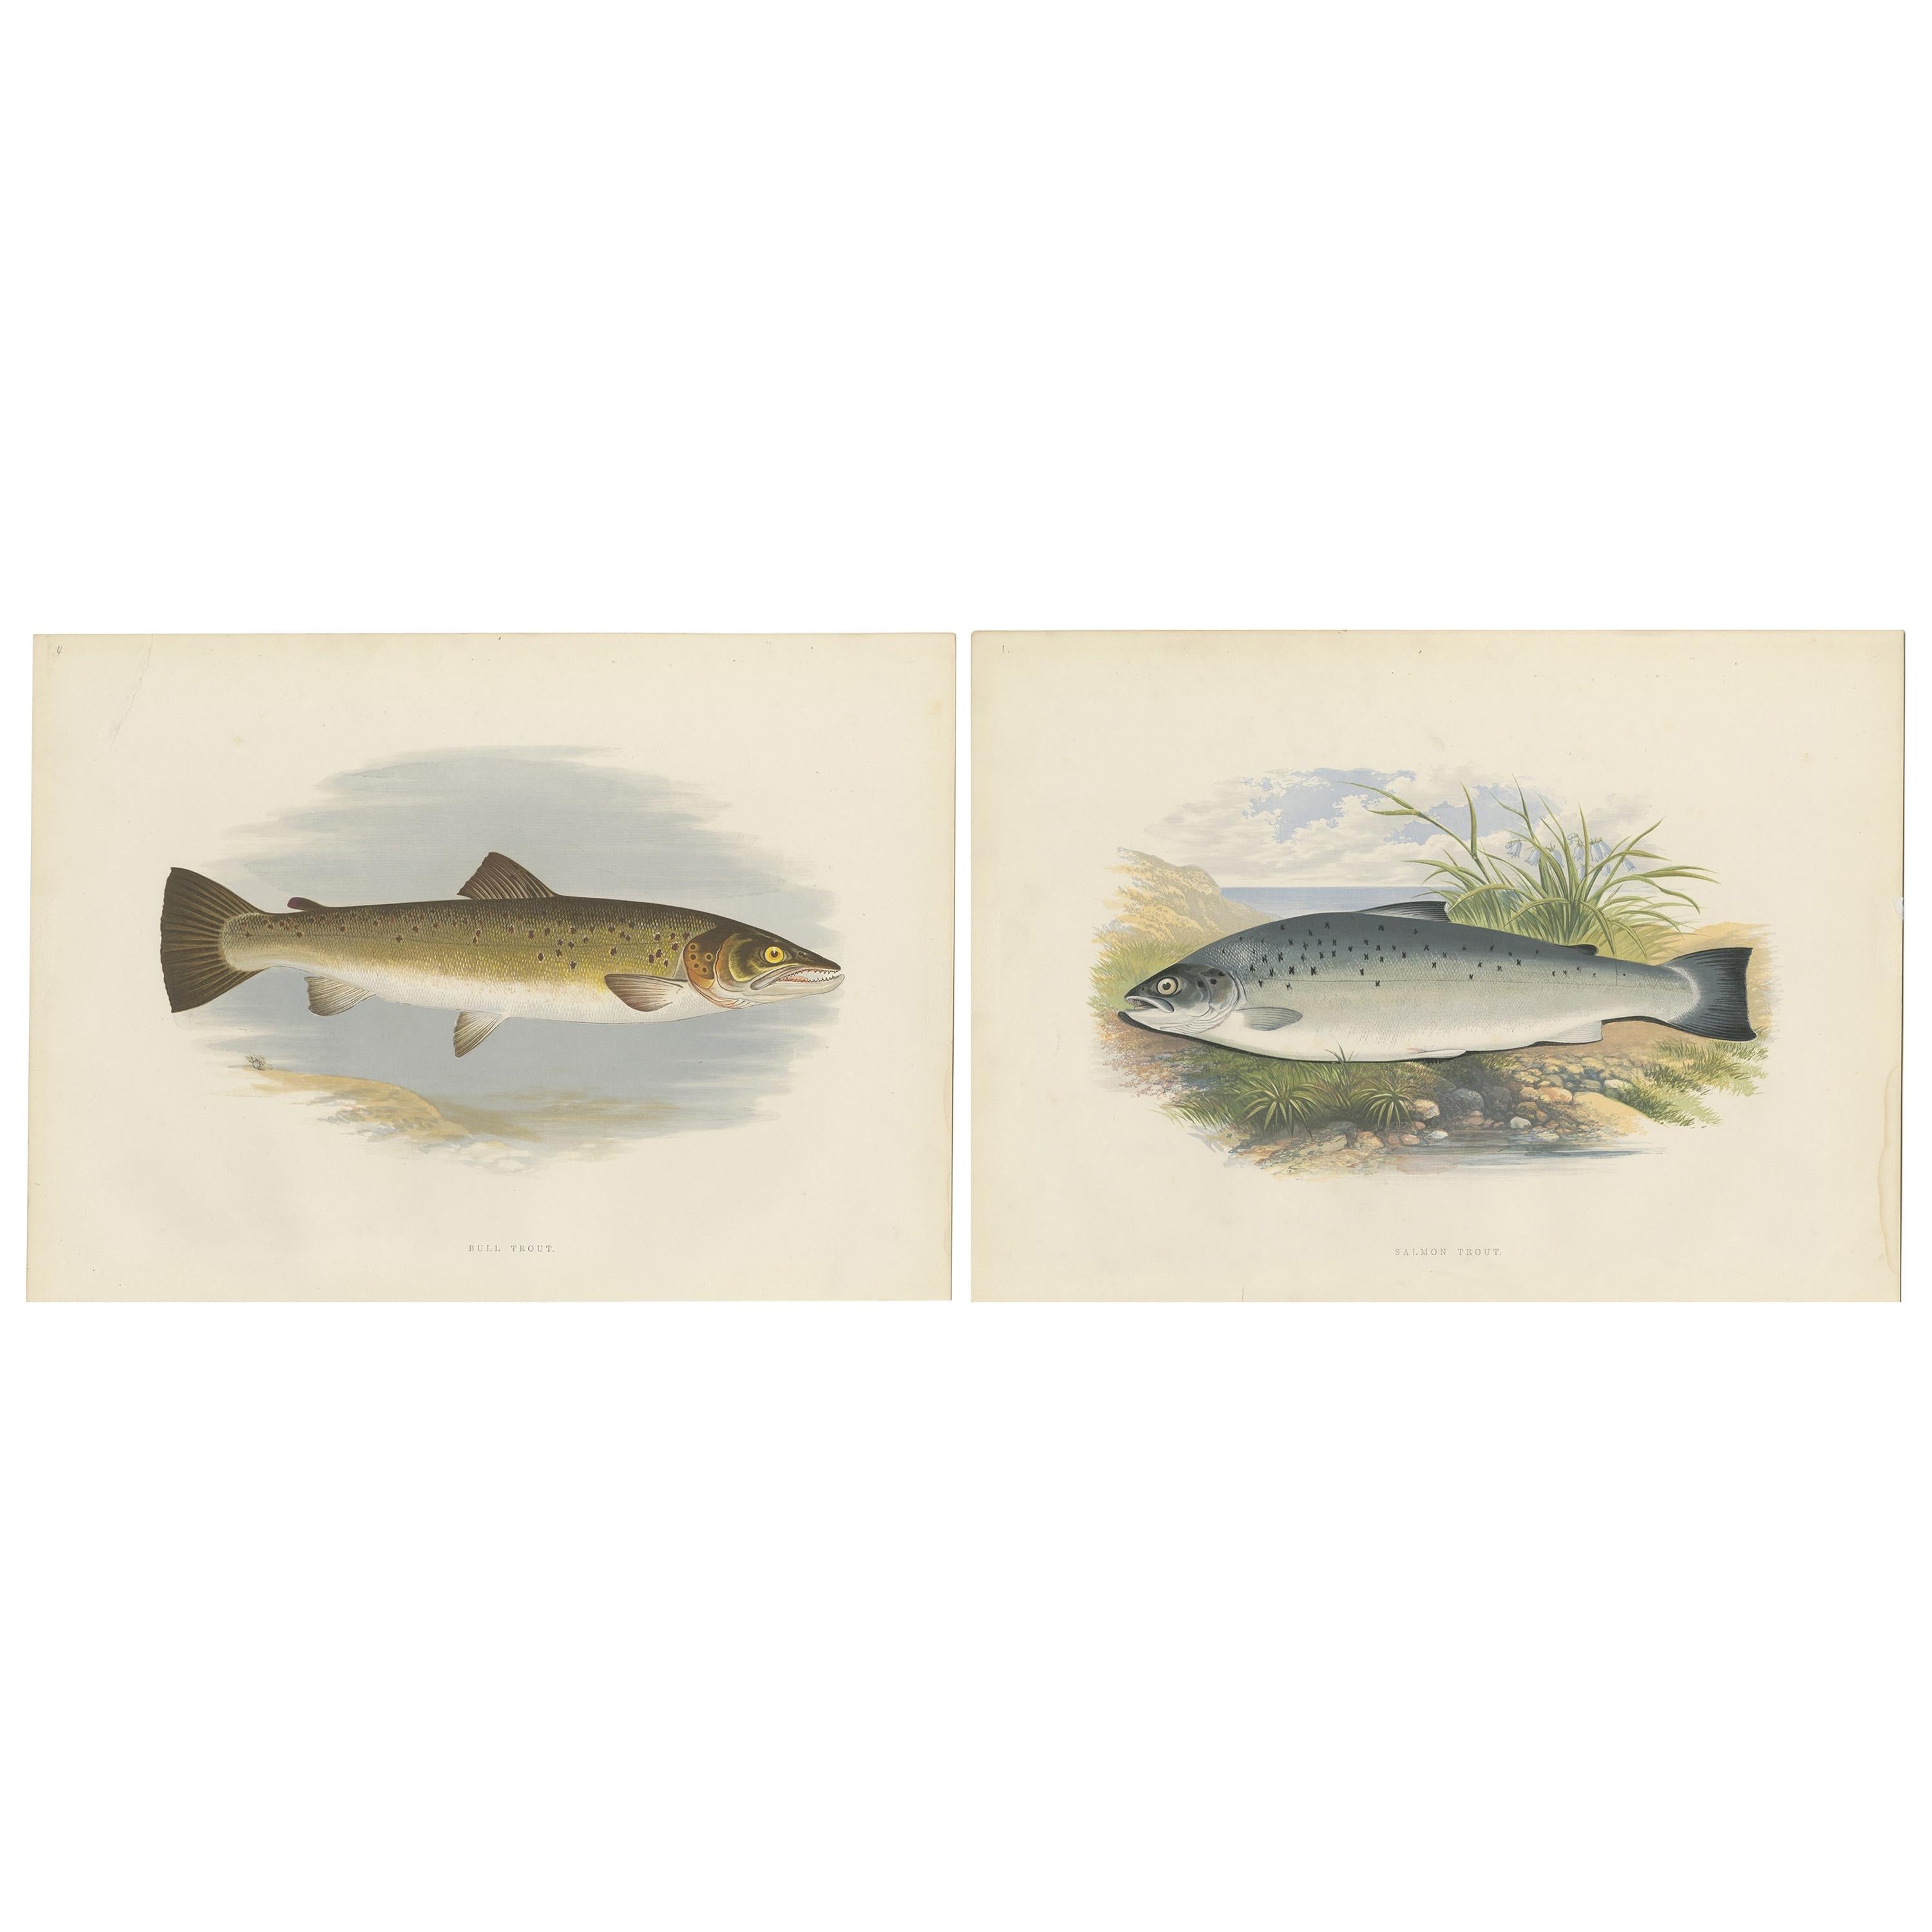 Set of Two Fish Prints Bull Trout and Salmon Trout by Houghton '1879'